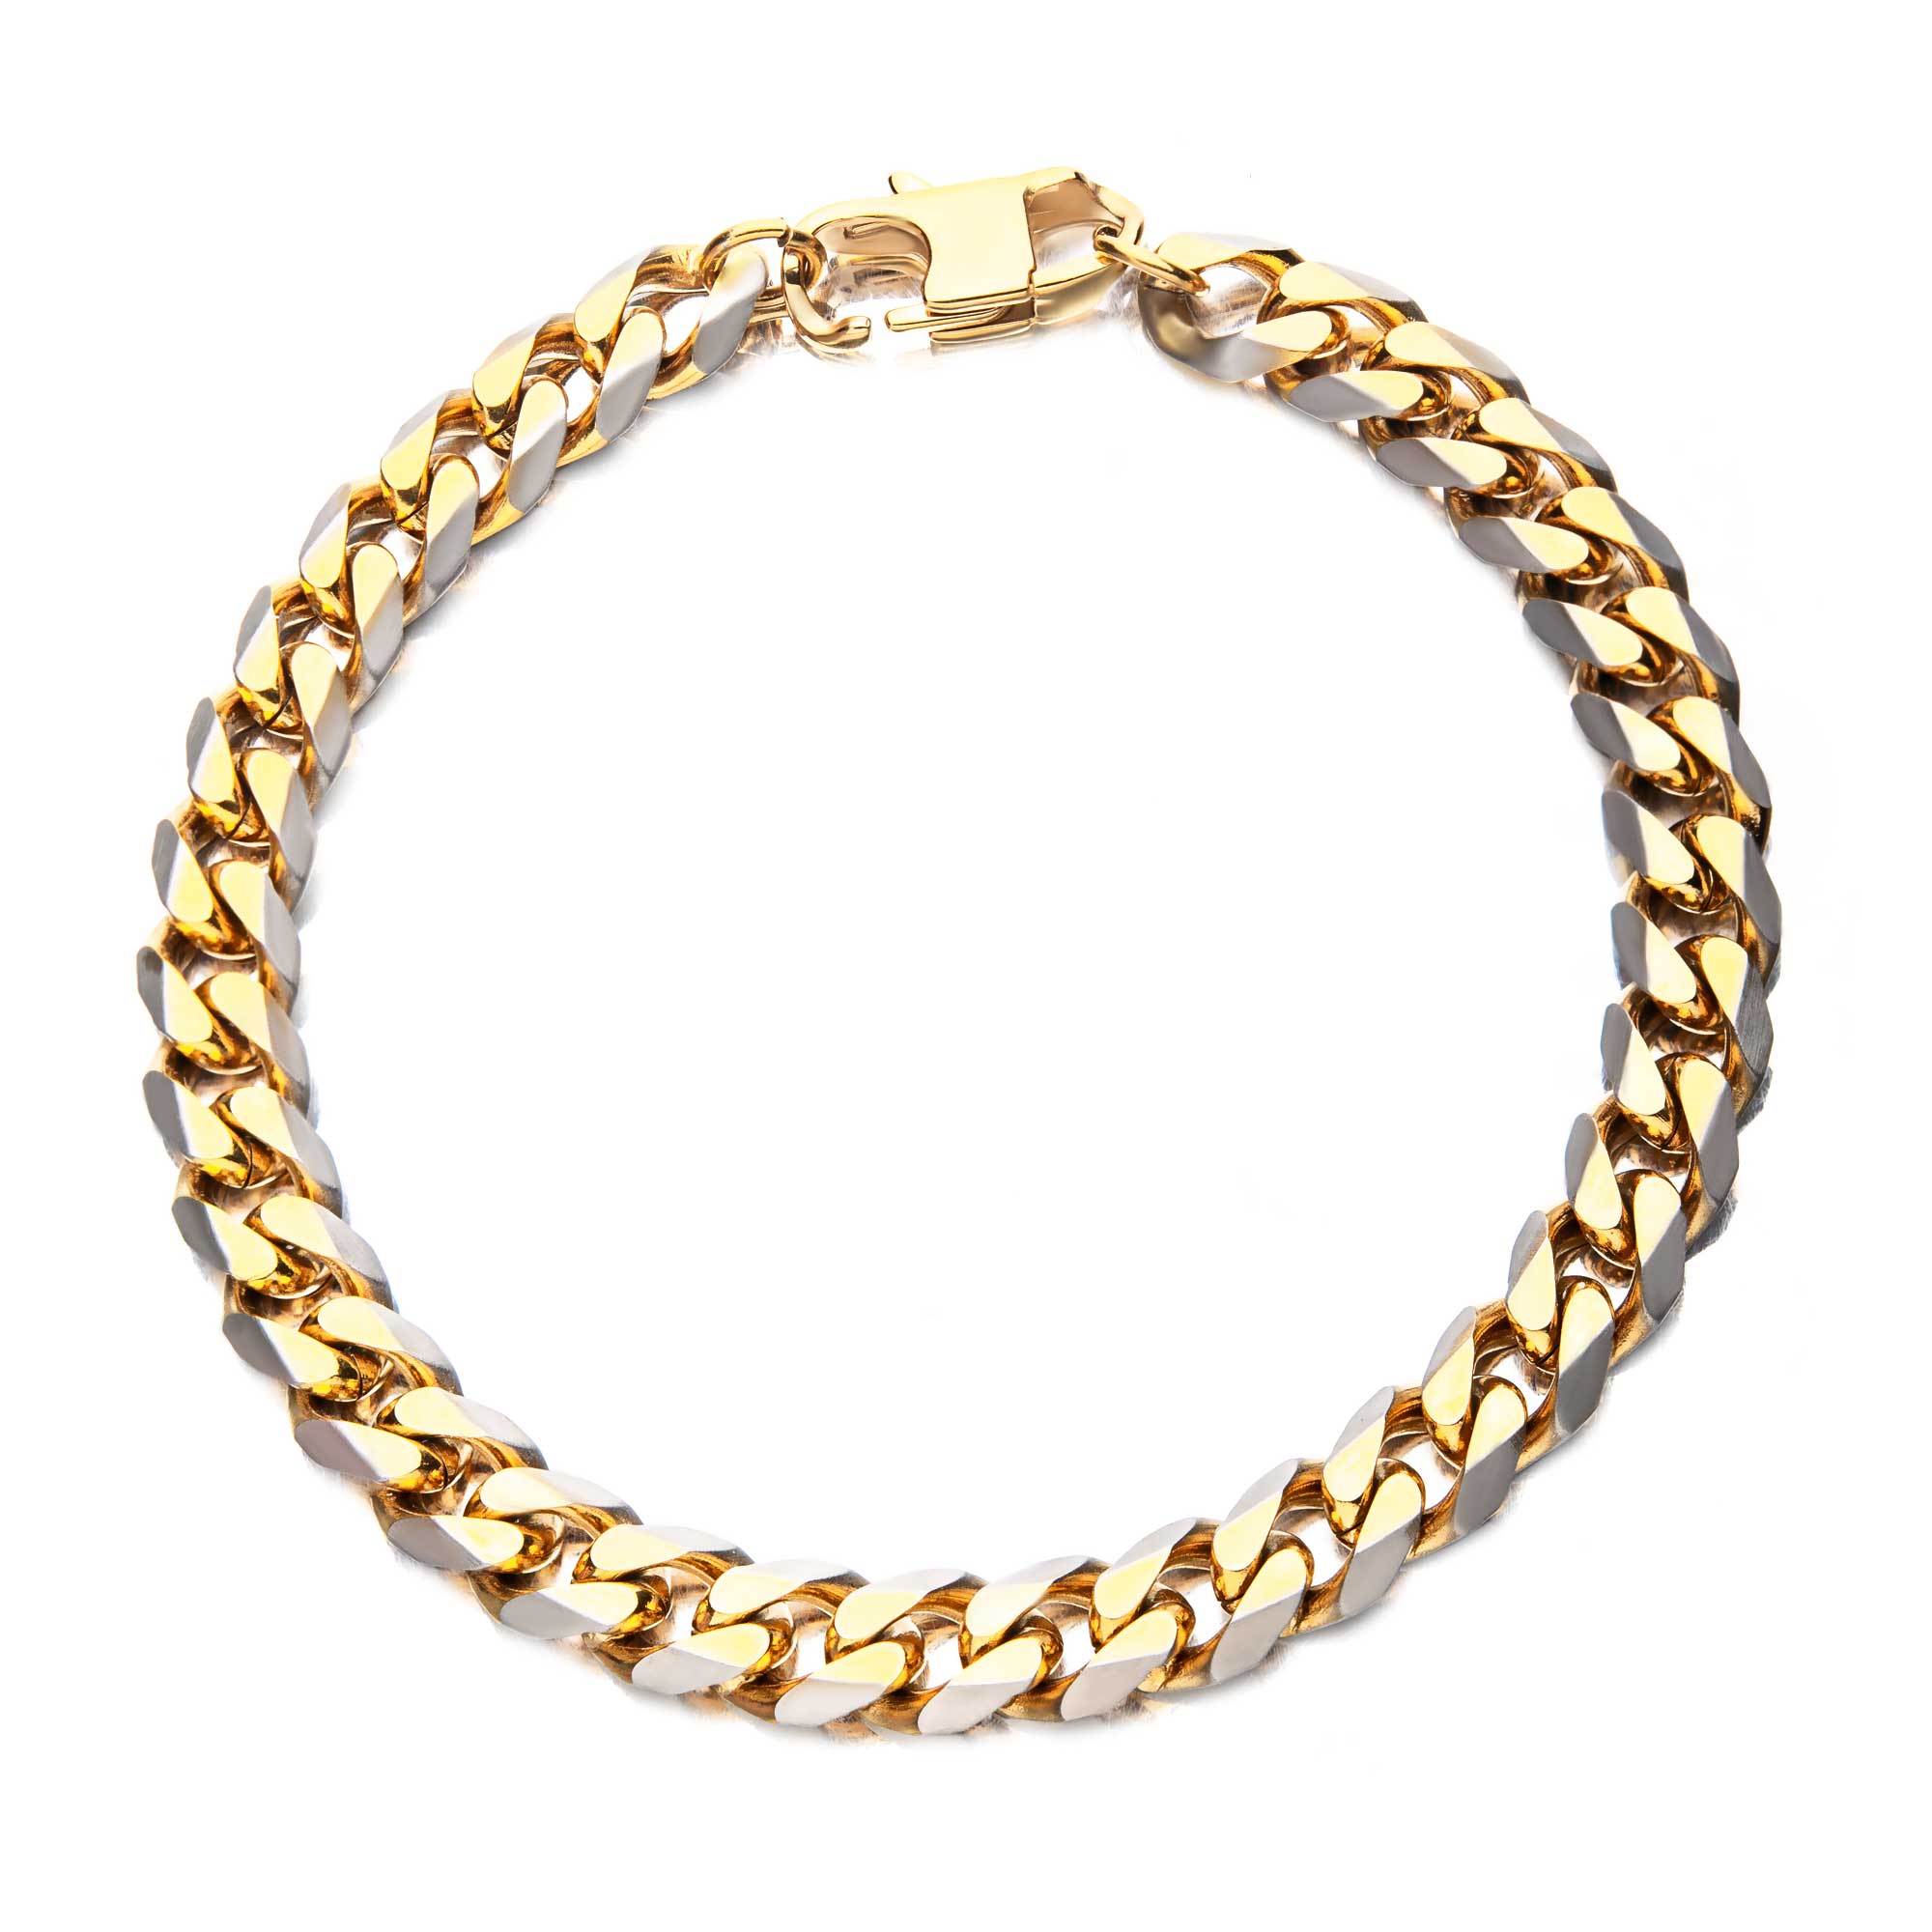 Stainless Steel Gold Plated 8mm Curb Chain with Lobster Clasp Image 2 Spath Jewelers Bartow, FL